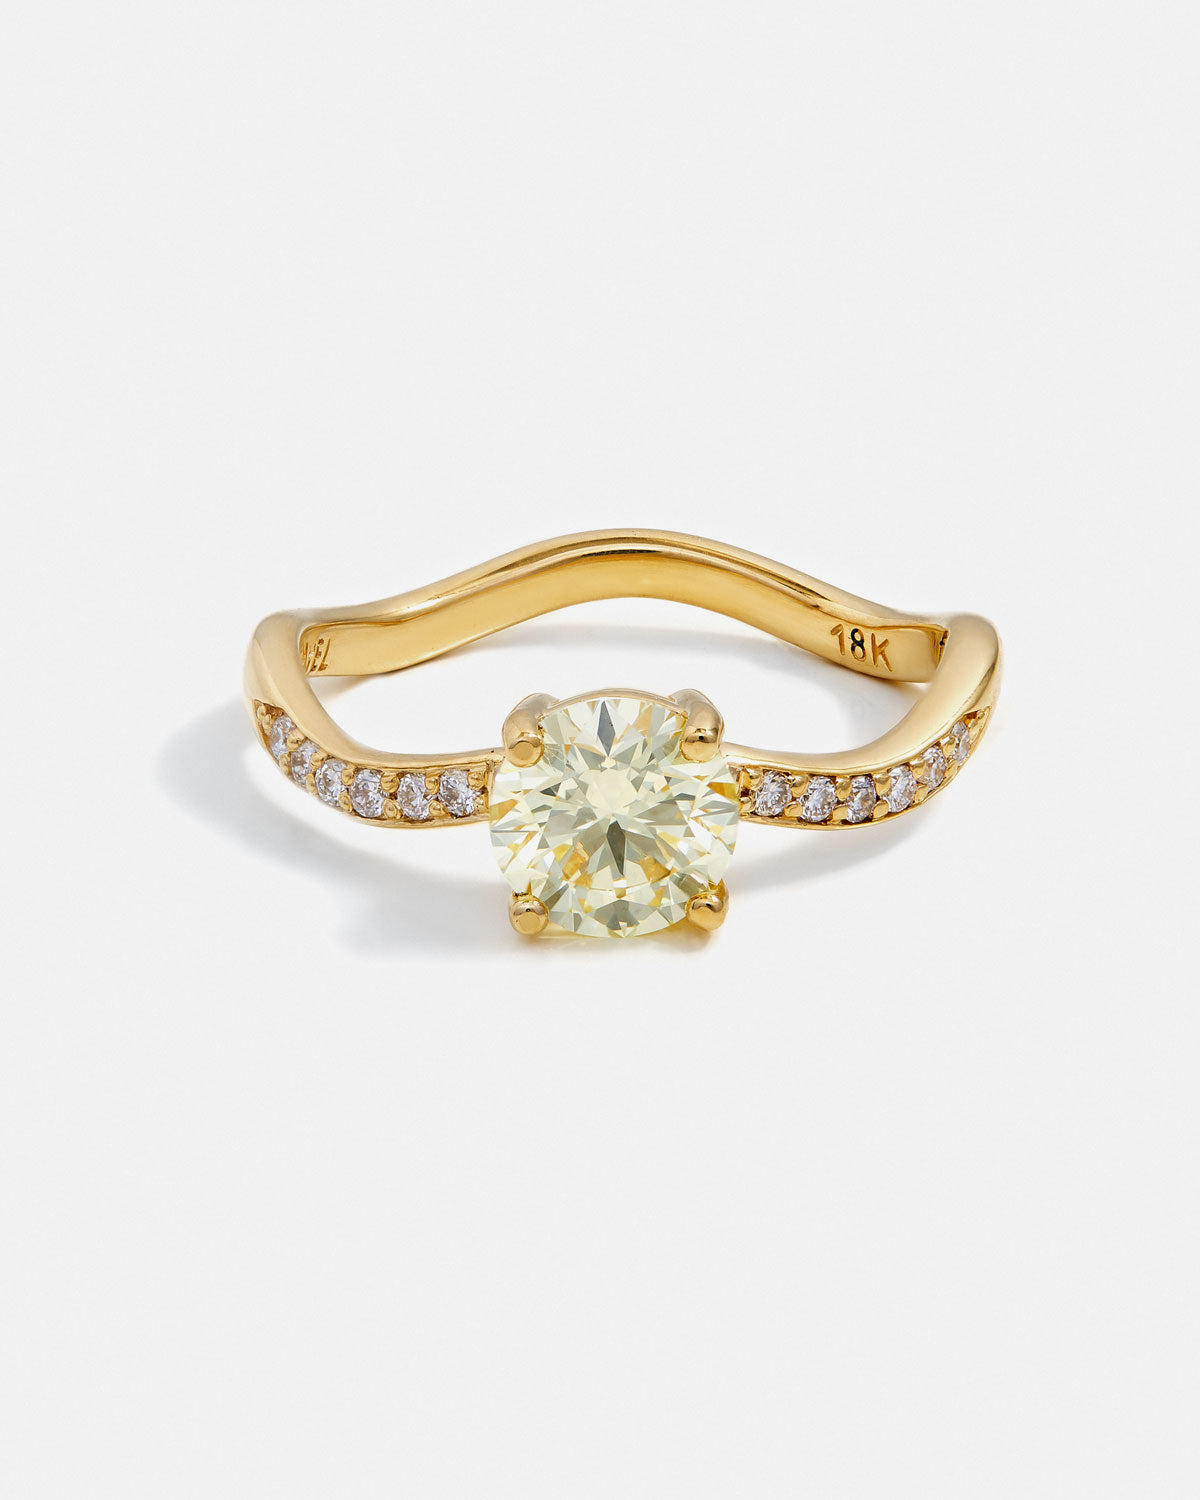 Disco Ring in 18k Fairmined Yellow Gold with 1.07 carat Yellow lab-grown Diamond